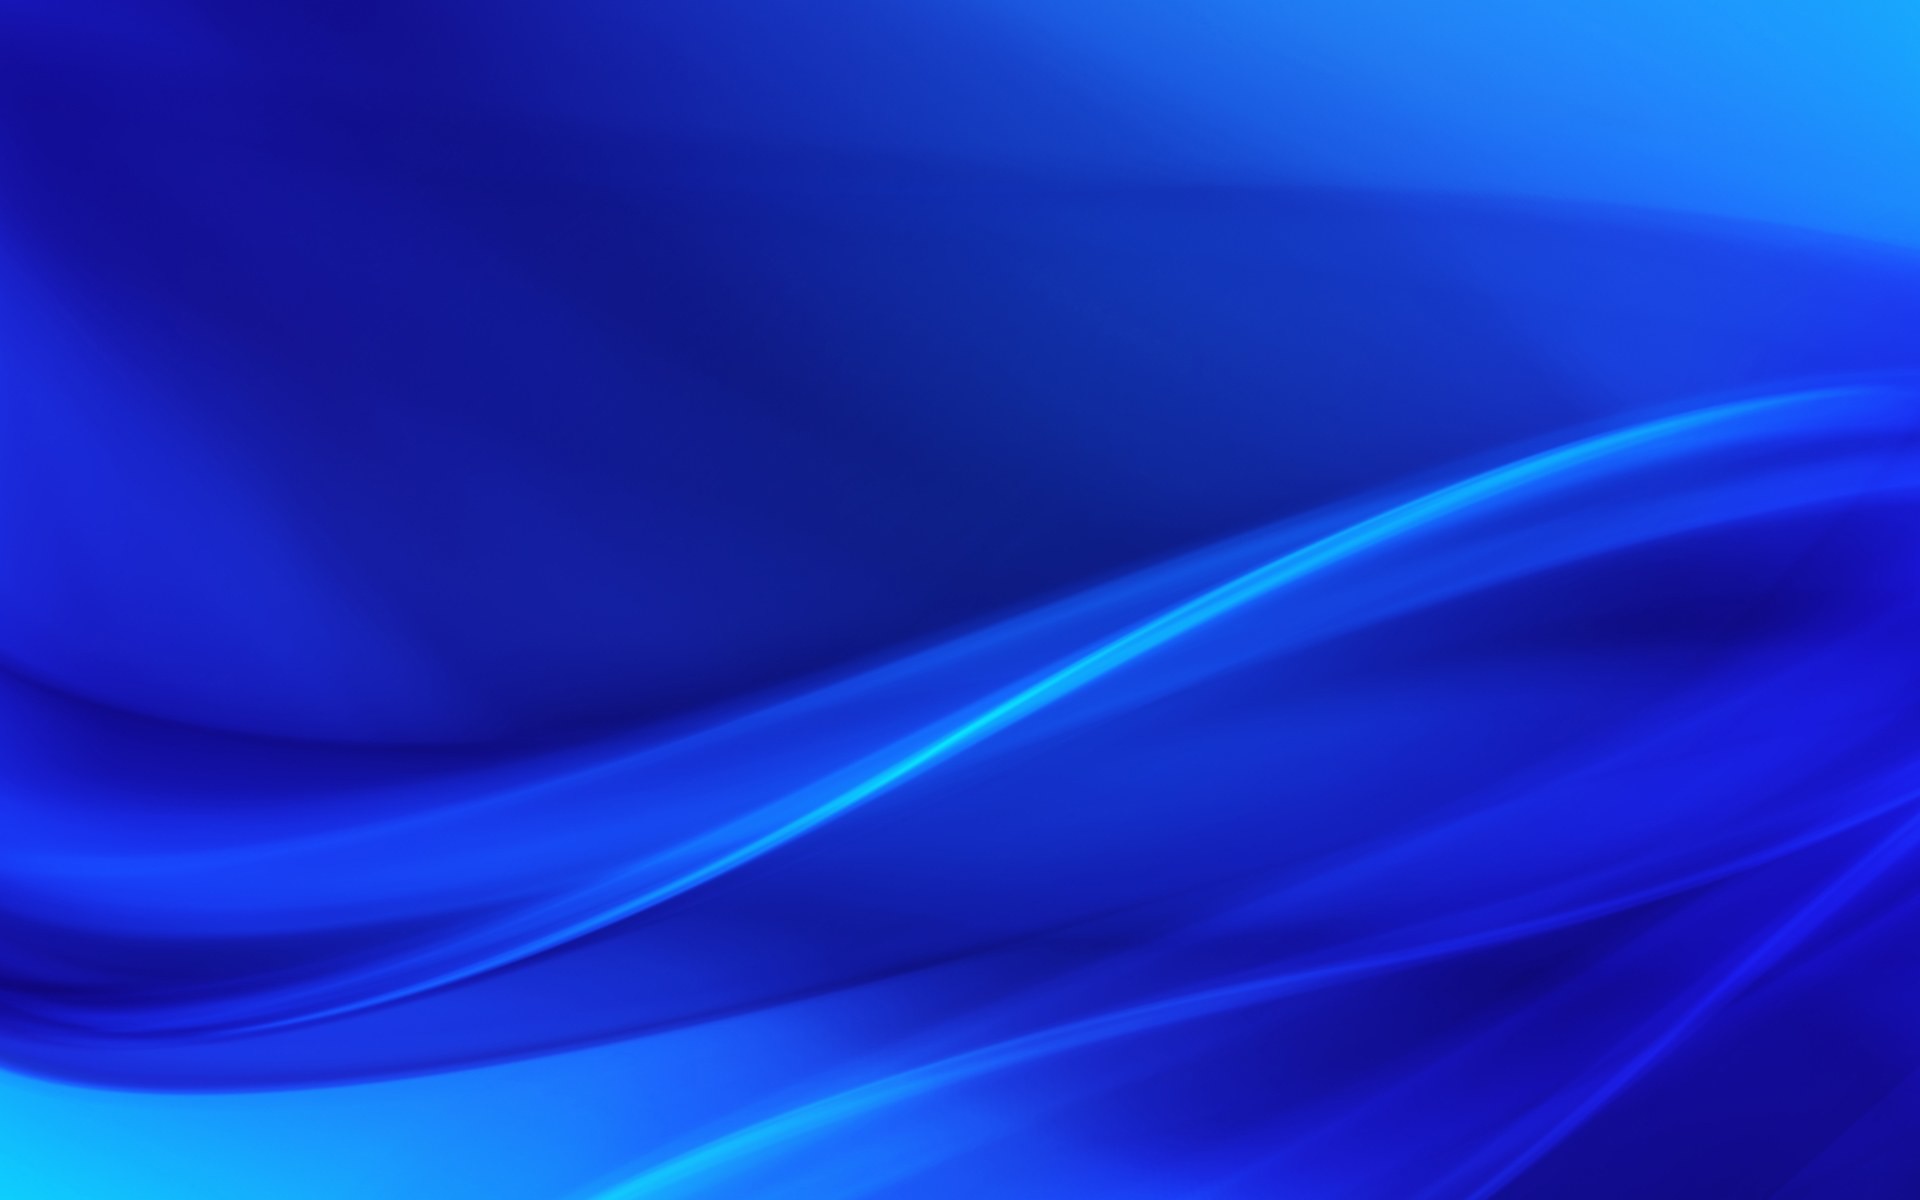 1920x1200 Blue Background - Blue Abstract Light Effect 1920*1200 NO.28 .